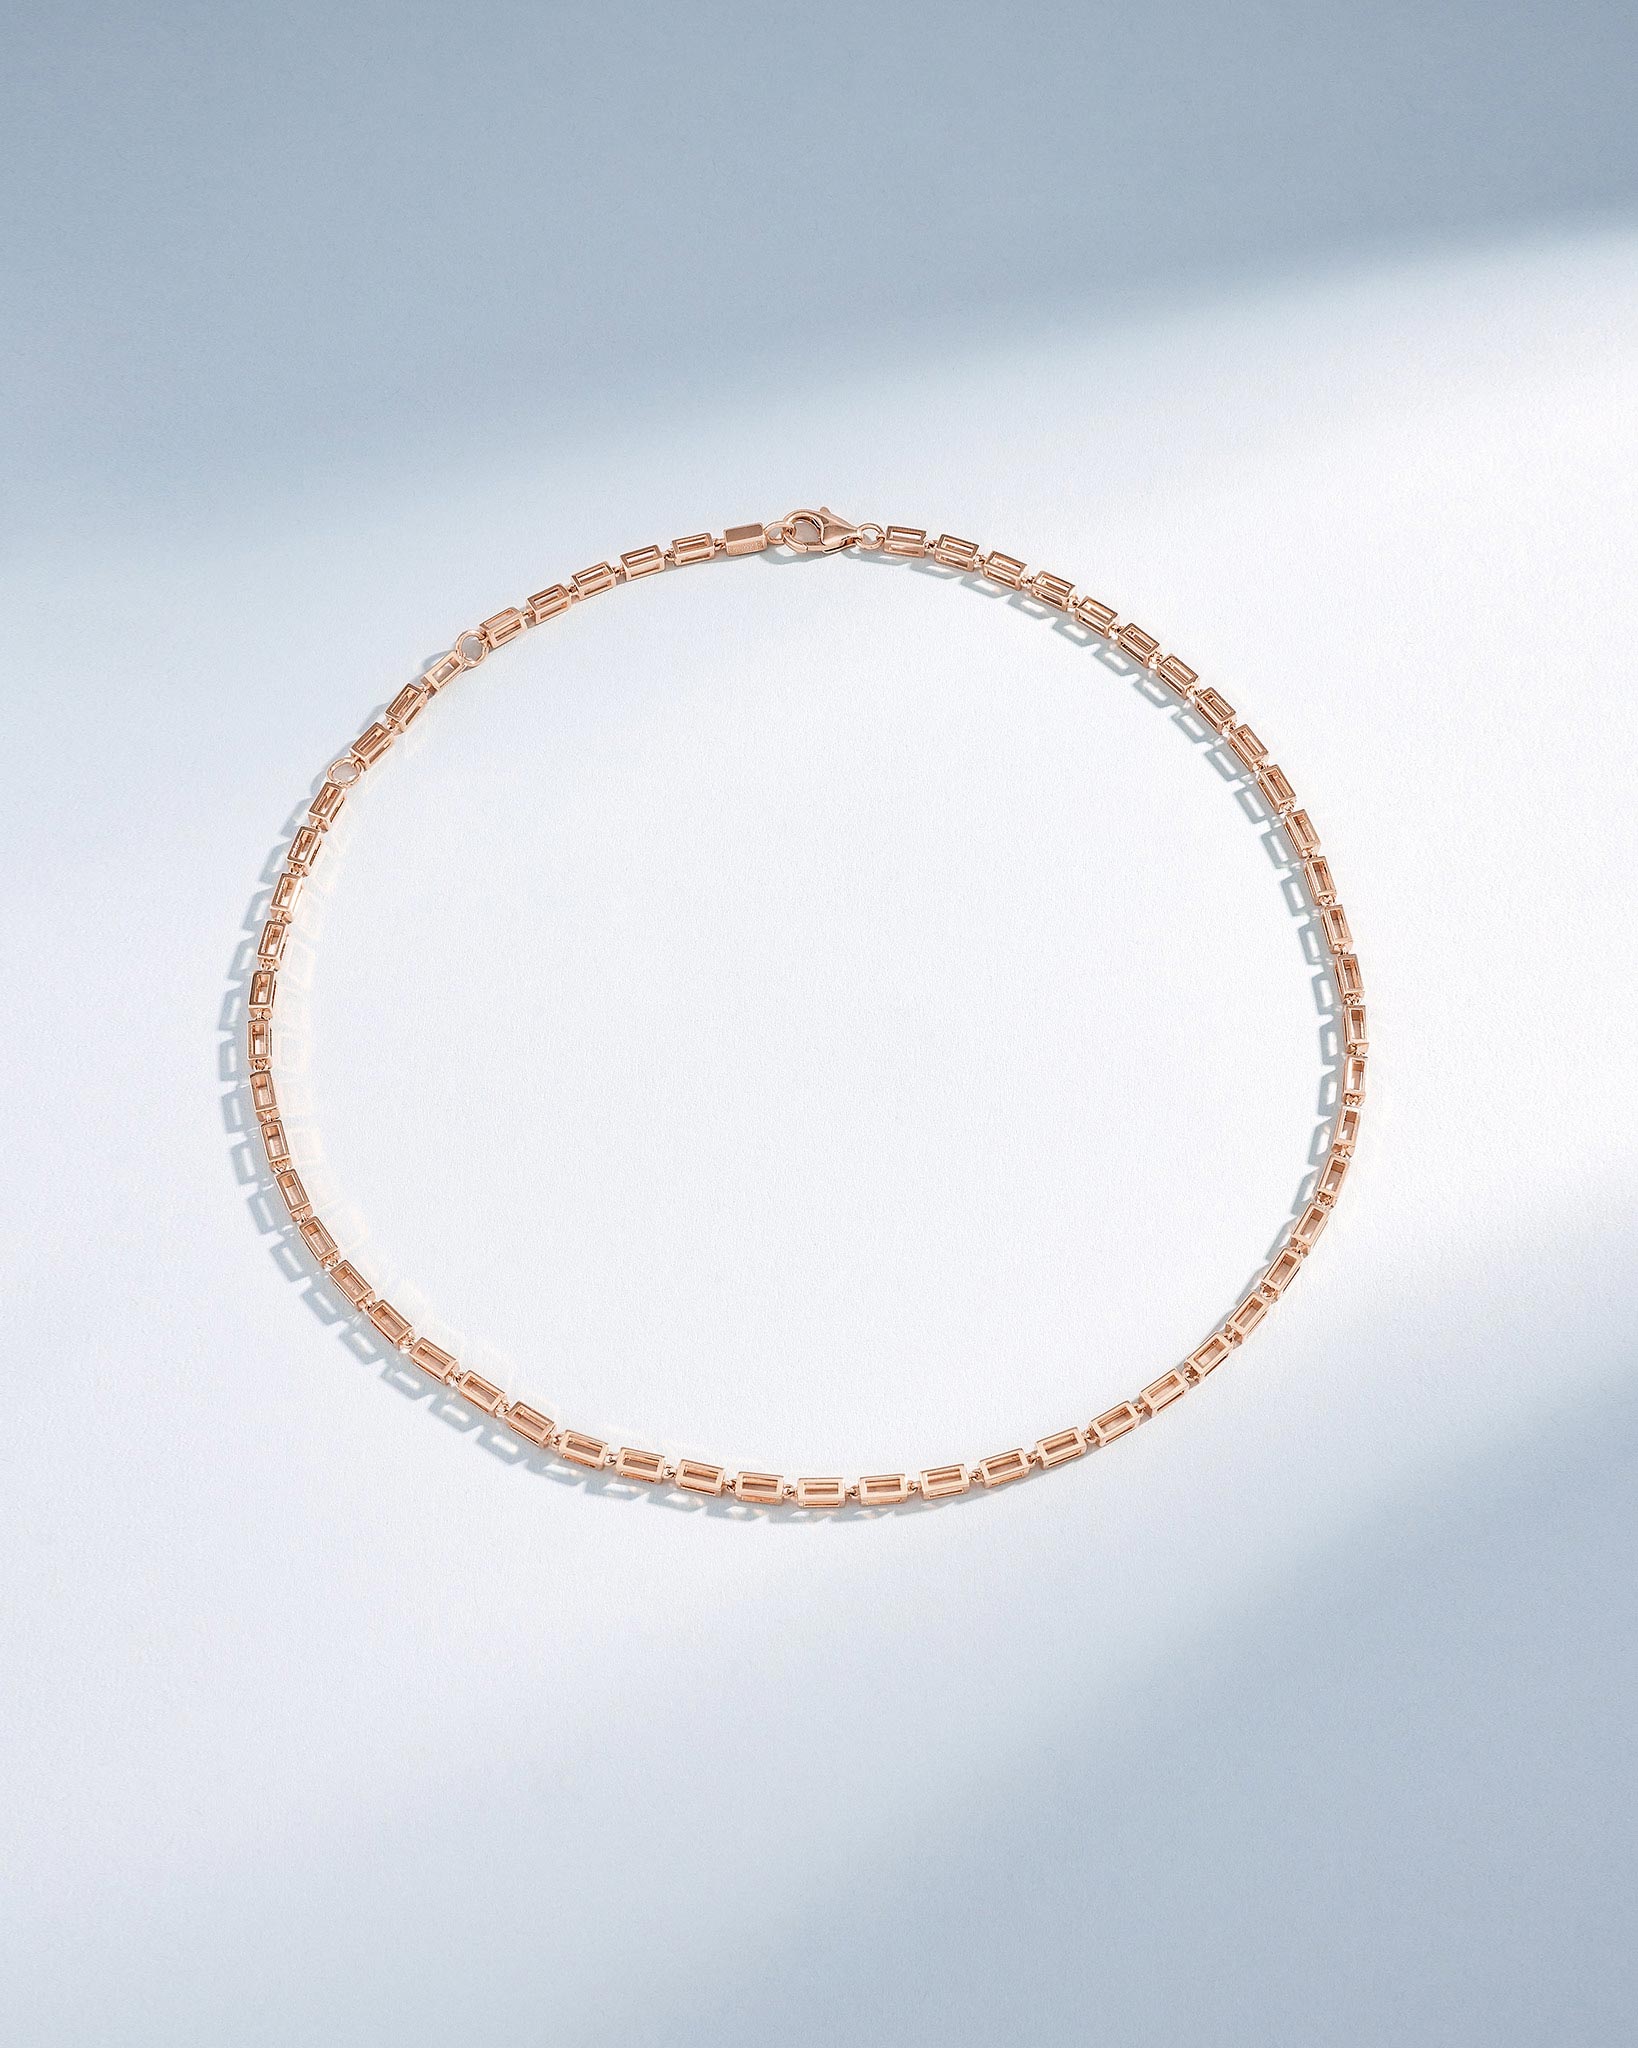 Suzanne Kalan Block-Chain Hollow Thick Necklace in 18k rose gold